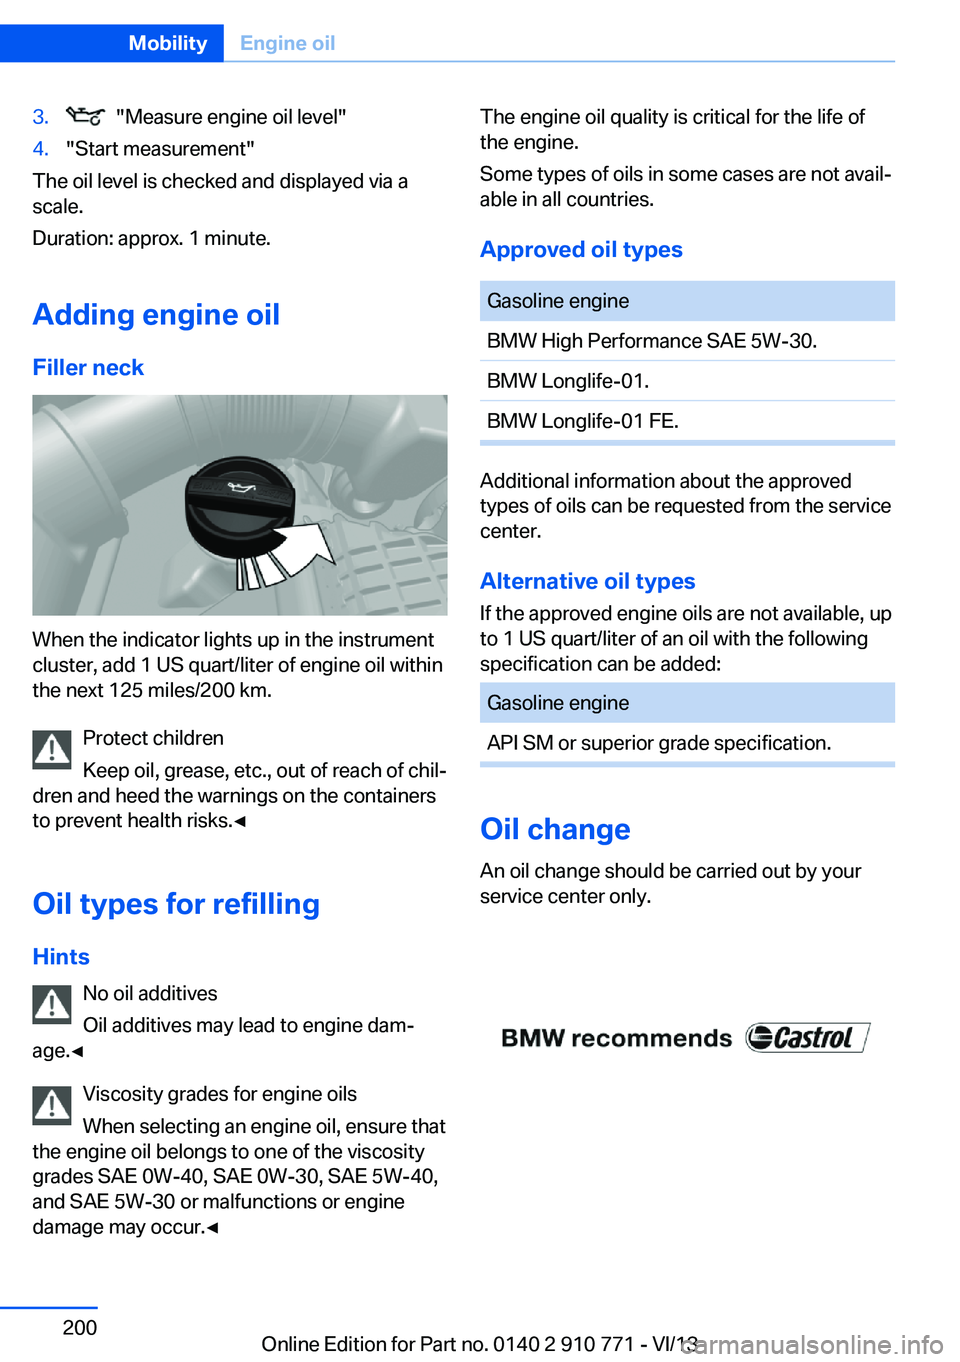 BMW 640I COUPE 2014  Owners Manual 3.  "Measure engine oil level"4."Start measurement"
The oil level is checked and displayed via a
scale.
Duration: approx. 1 minute.
Adding engine oil Filler neck
When the indicator lig